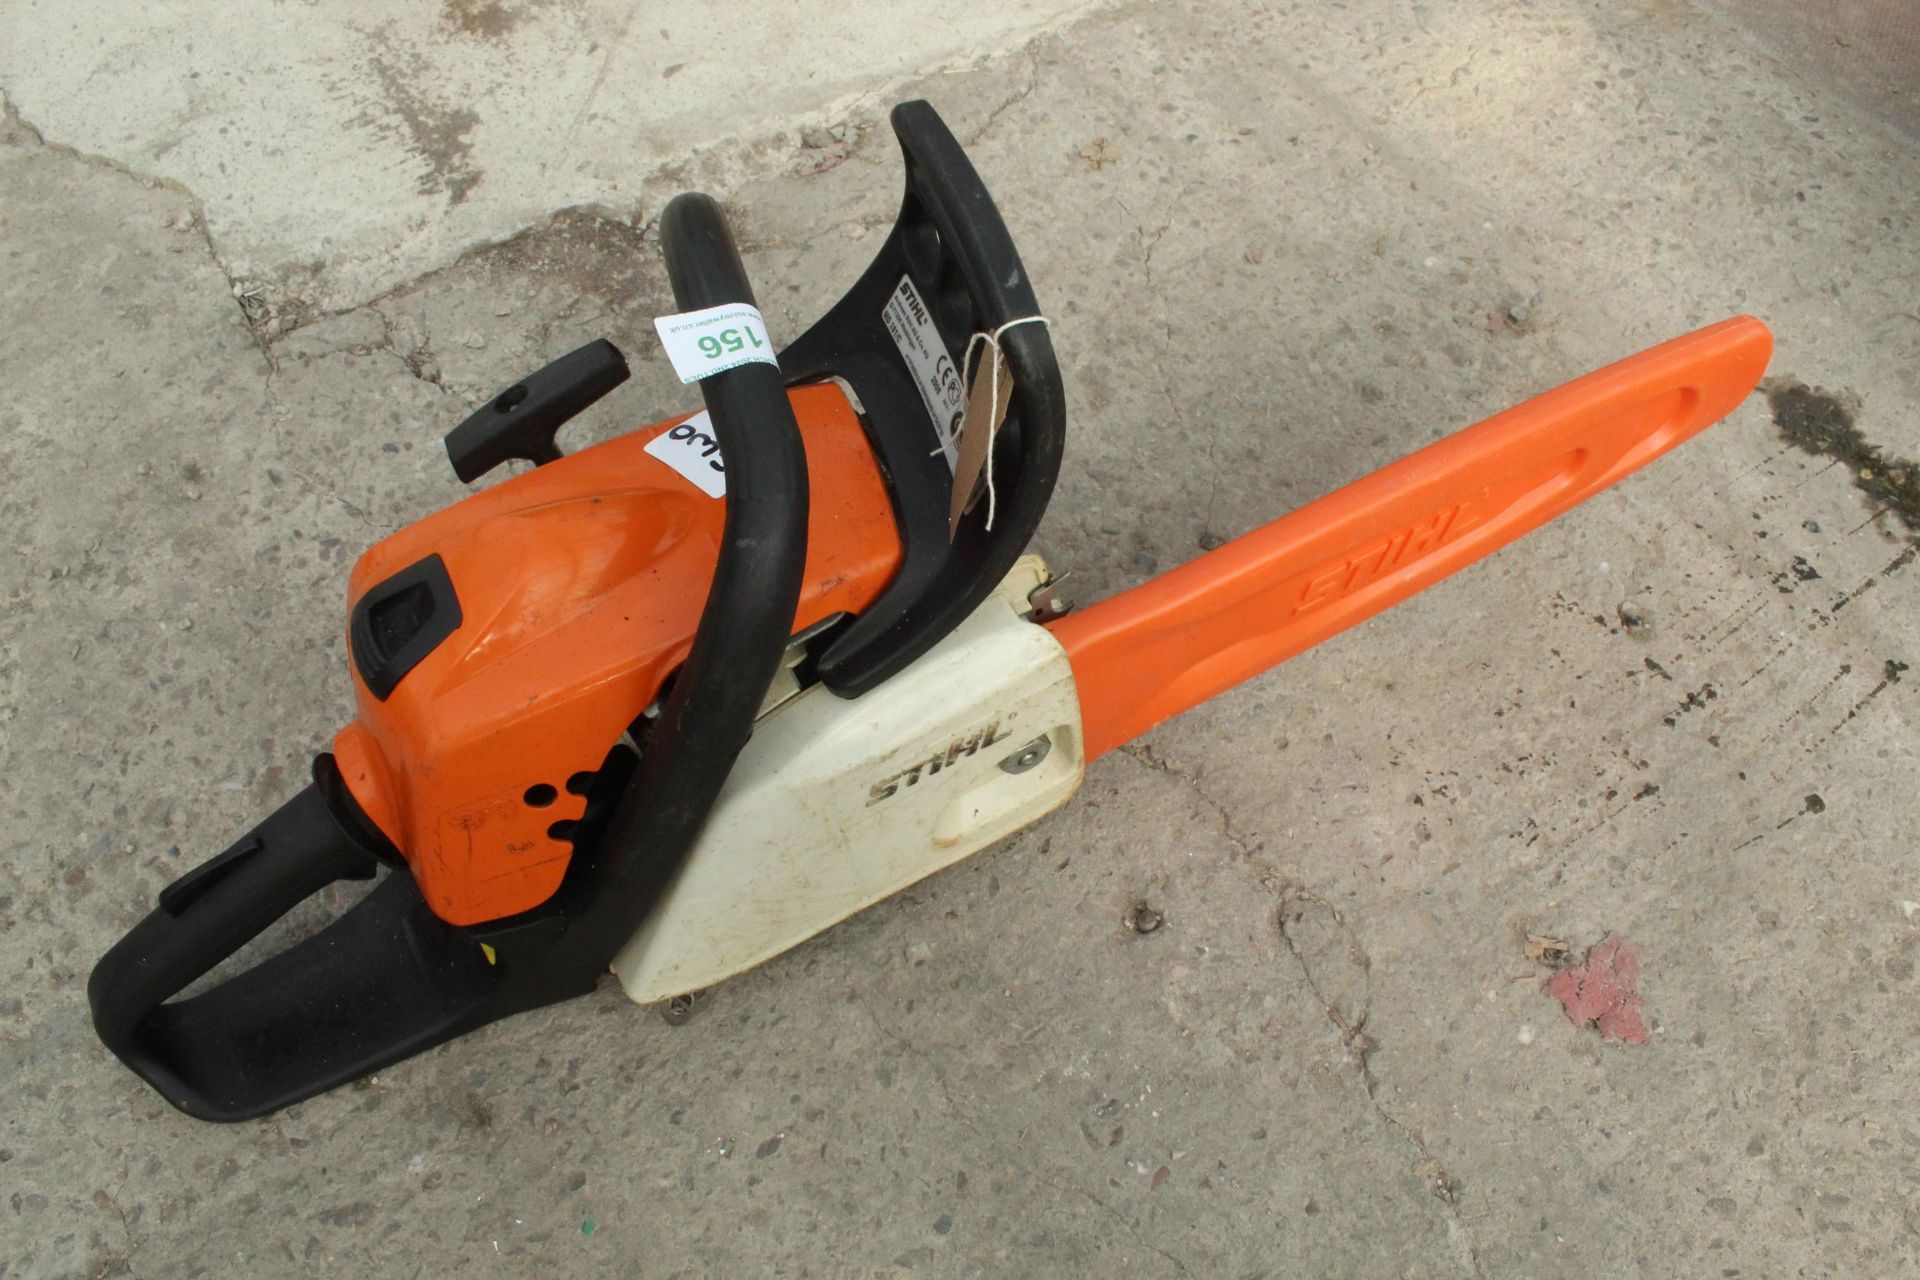 STIHL MS181 CHAINSAW IN WORKING ORDER NO VAT - Image 2 of 2